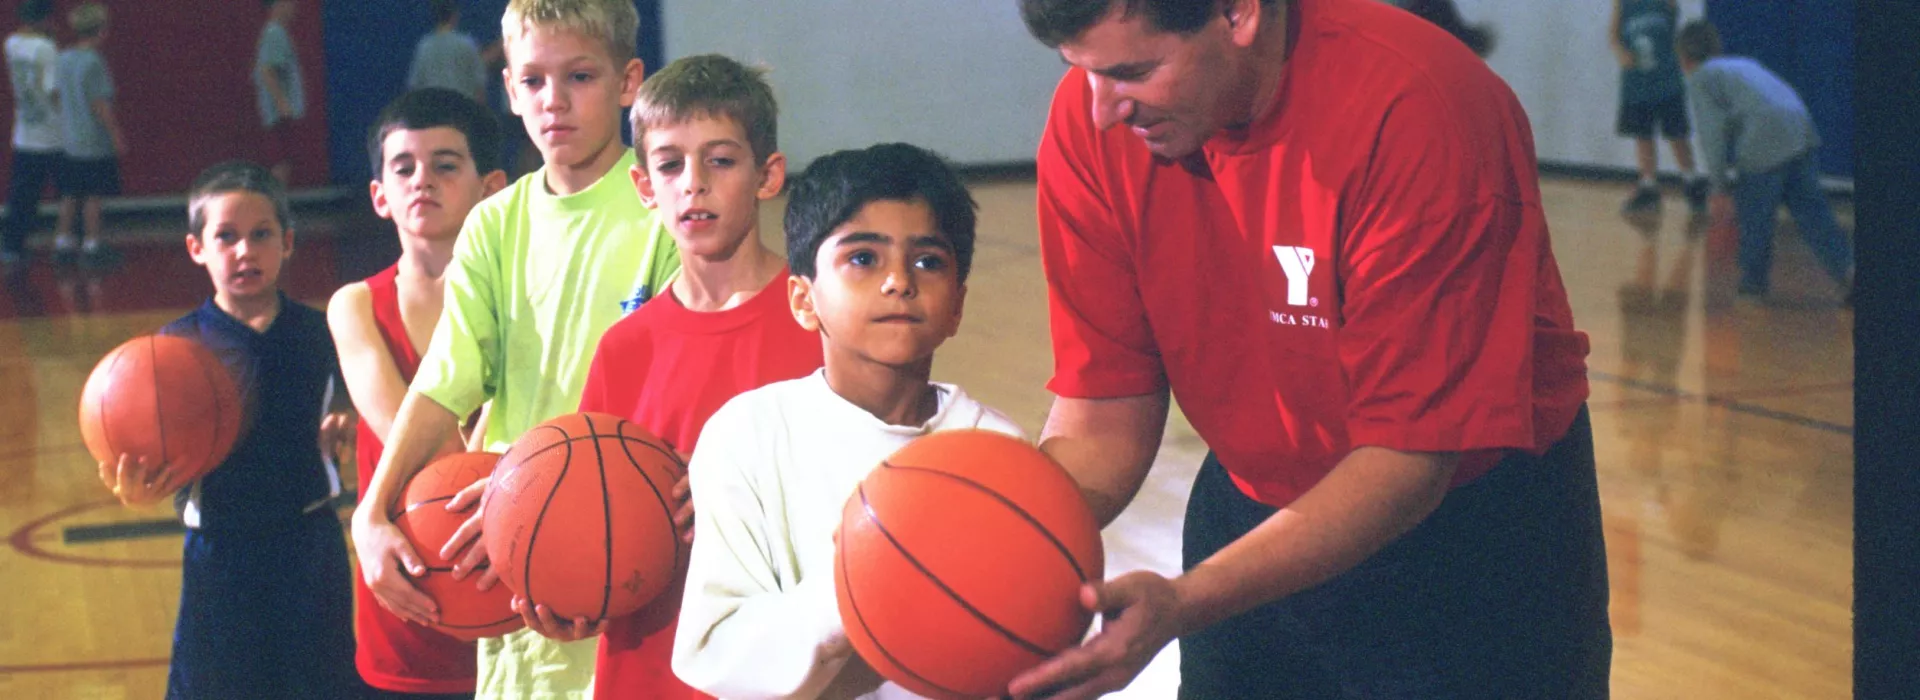 Five boys learning basketball from instructor.